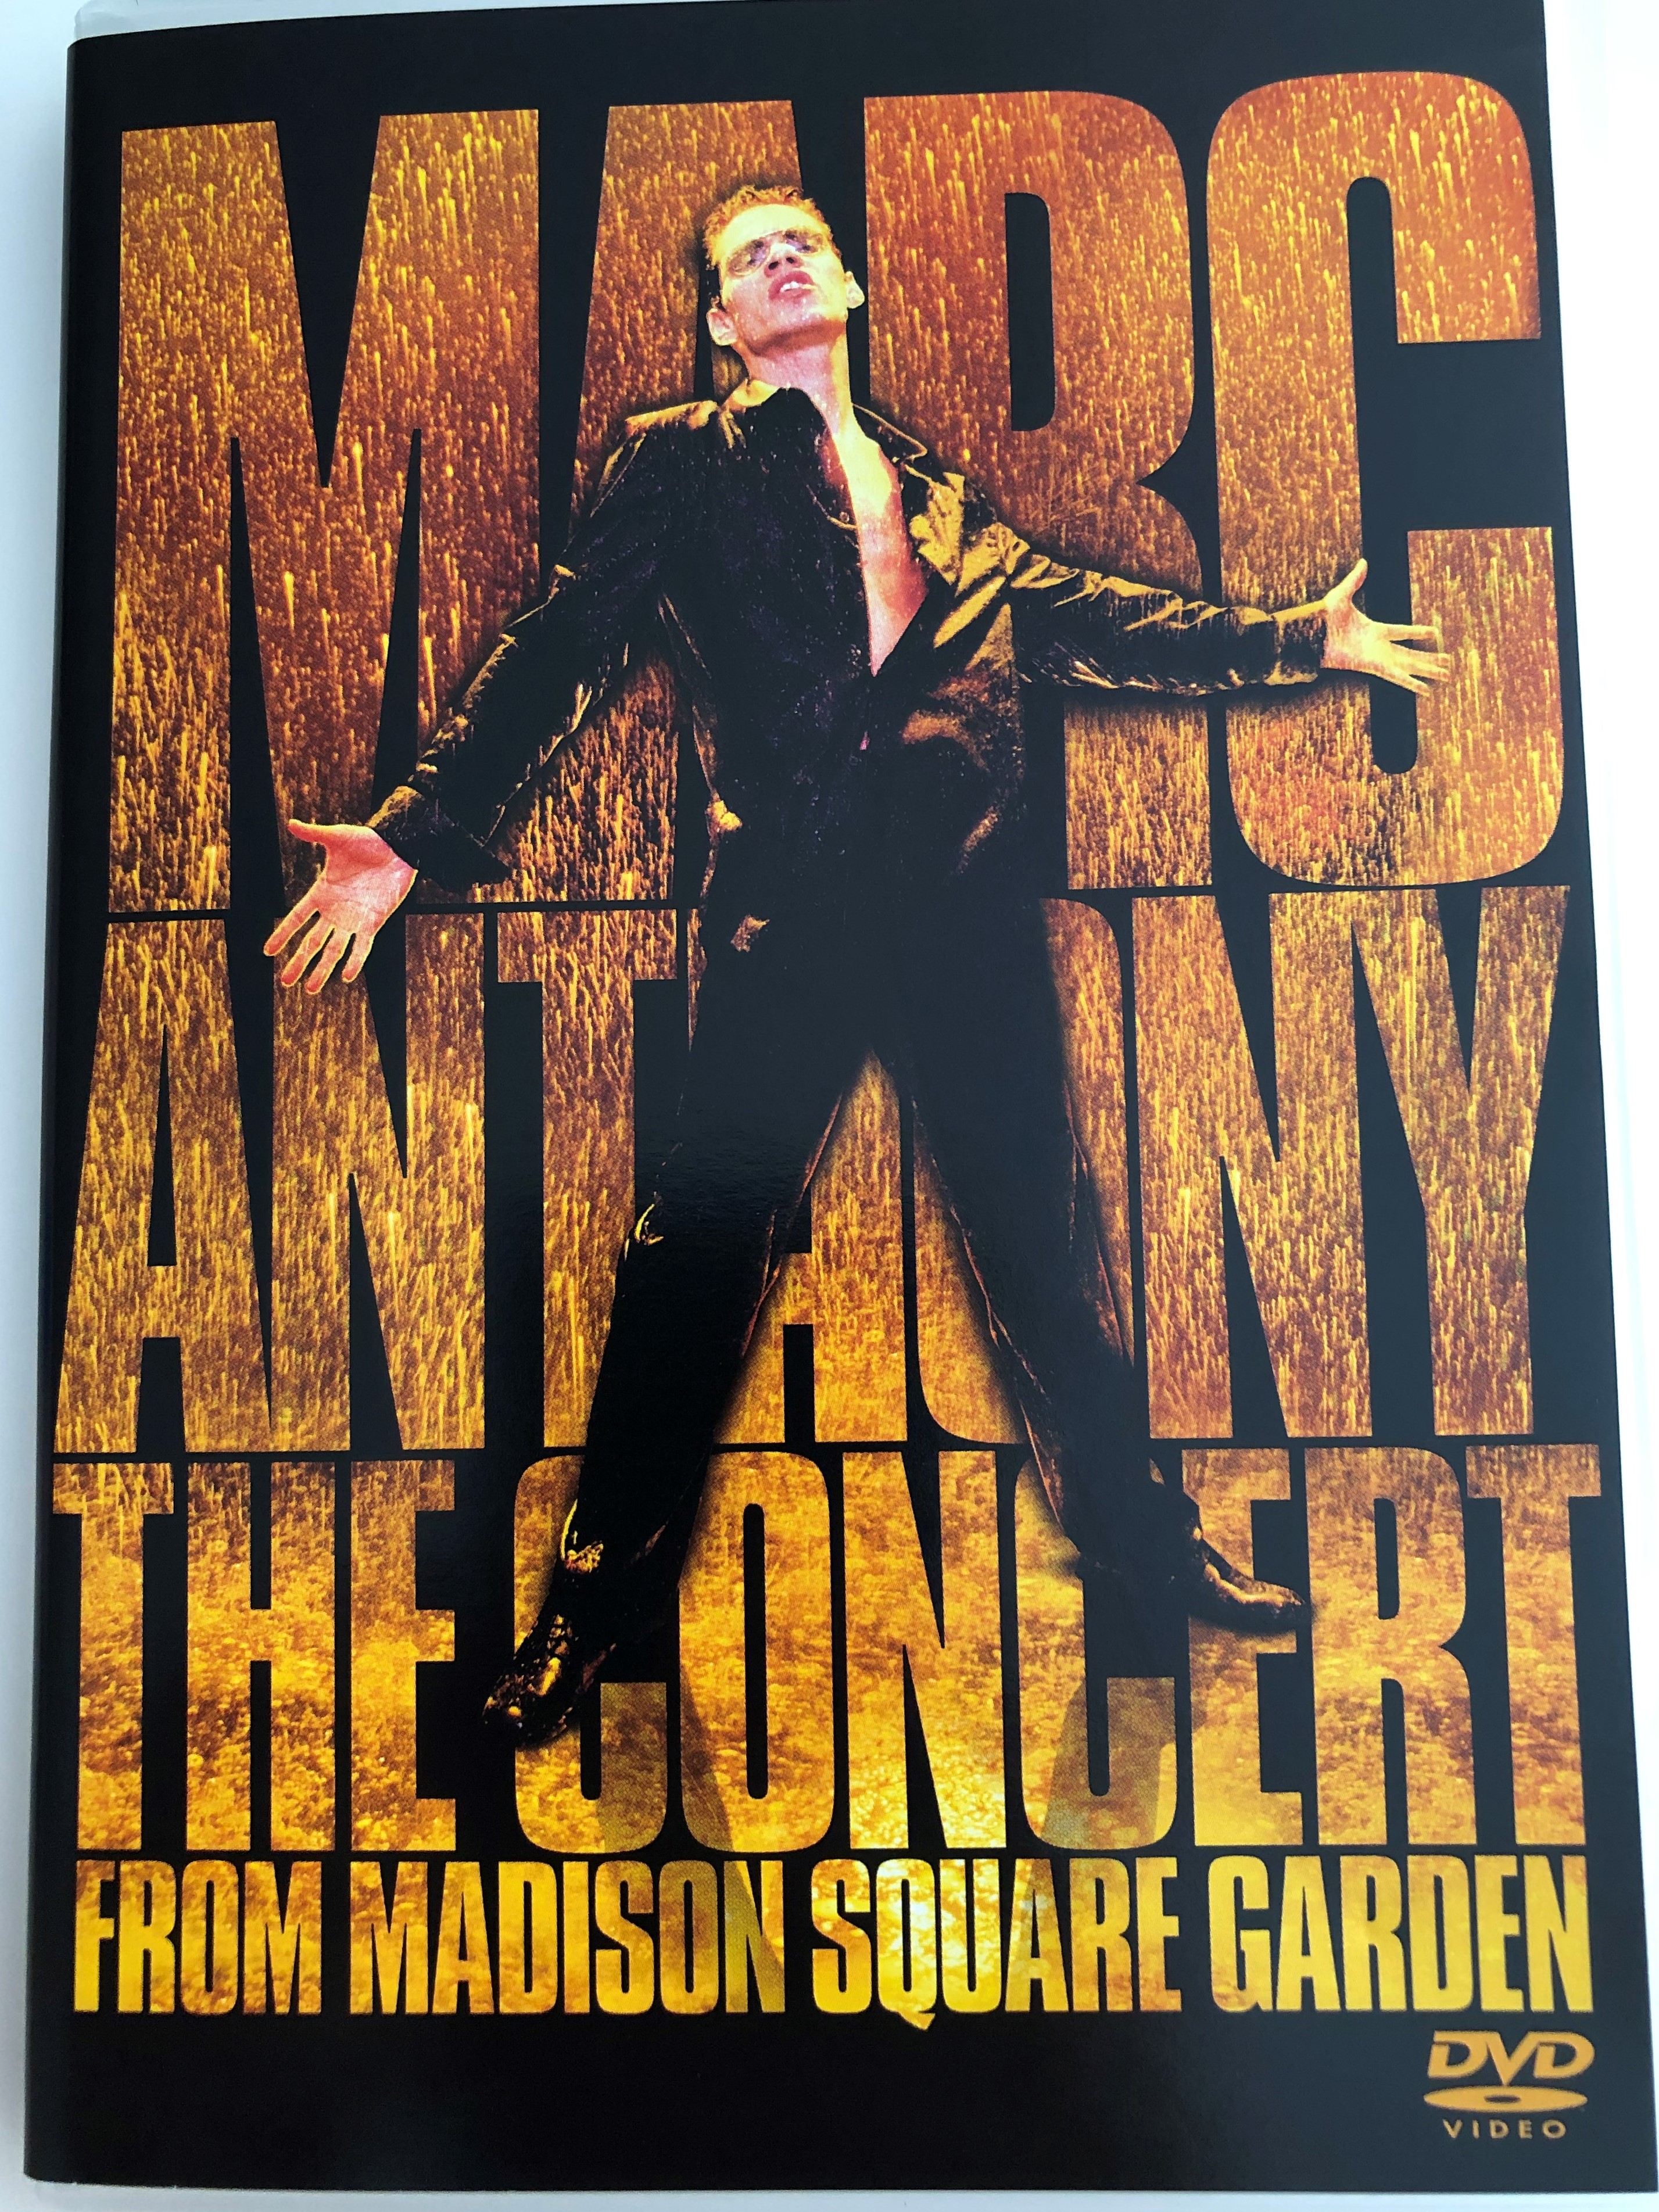 Mark Anthony - The Concert from Madison Square Garden DVD 2004 / You Sang  to Me, Hasta Ayer, Remember Me / Col 2024329 - Bible in My Language